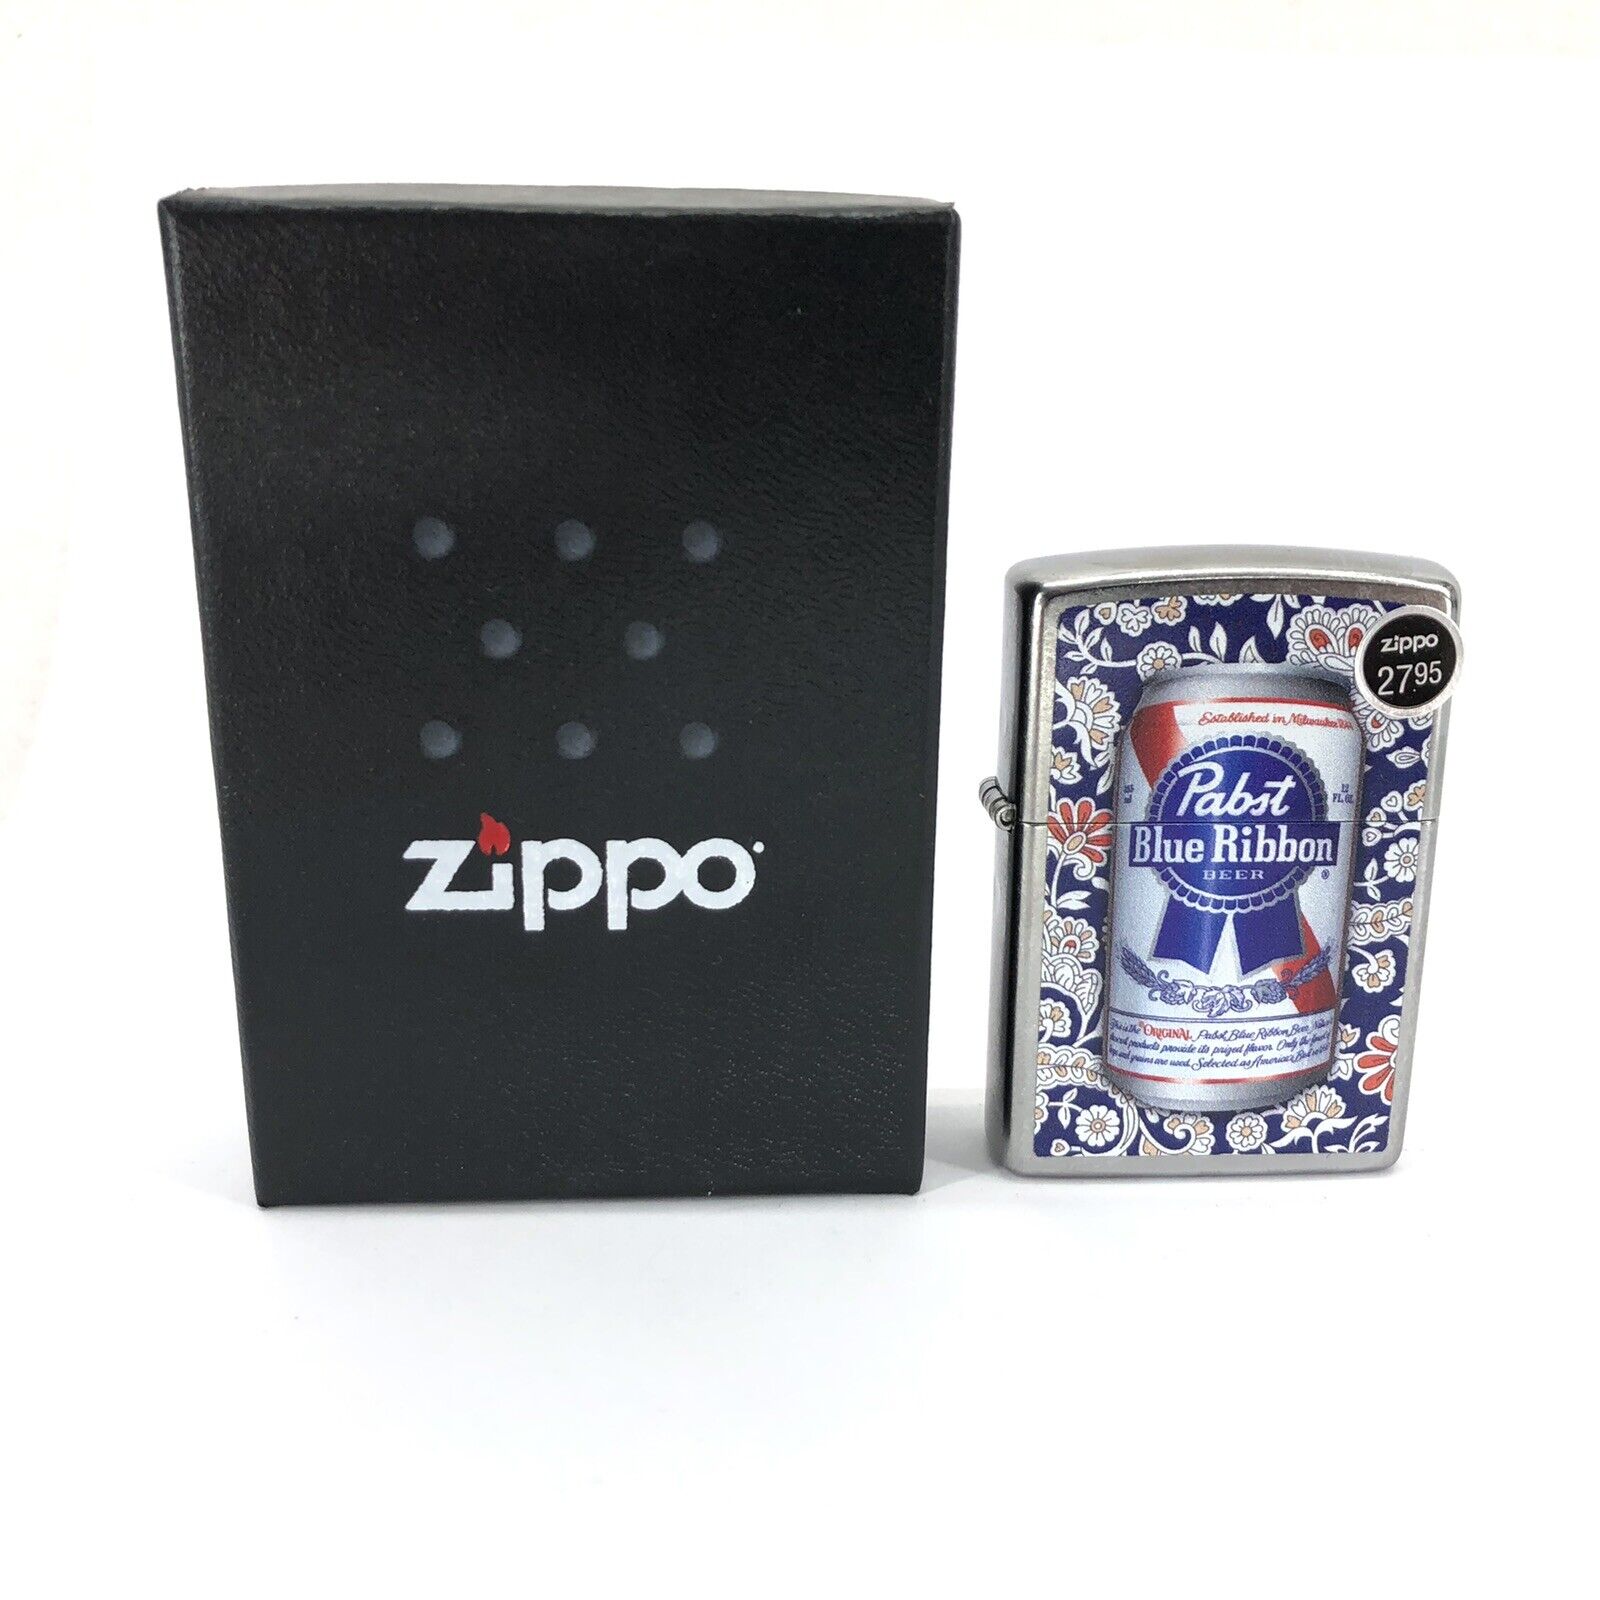 Zippo Windproof Lighter -Pabst Blue Ribbon Beer Can- NEW With Original Box 36012